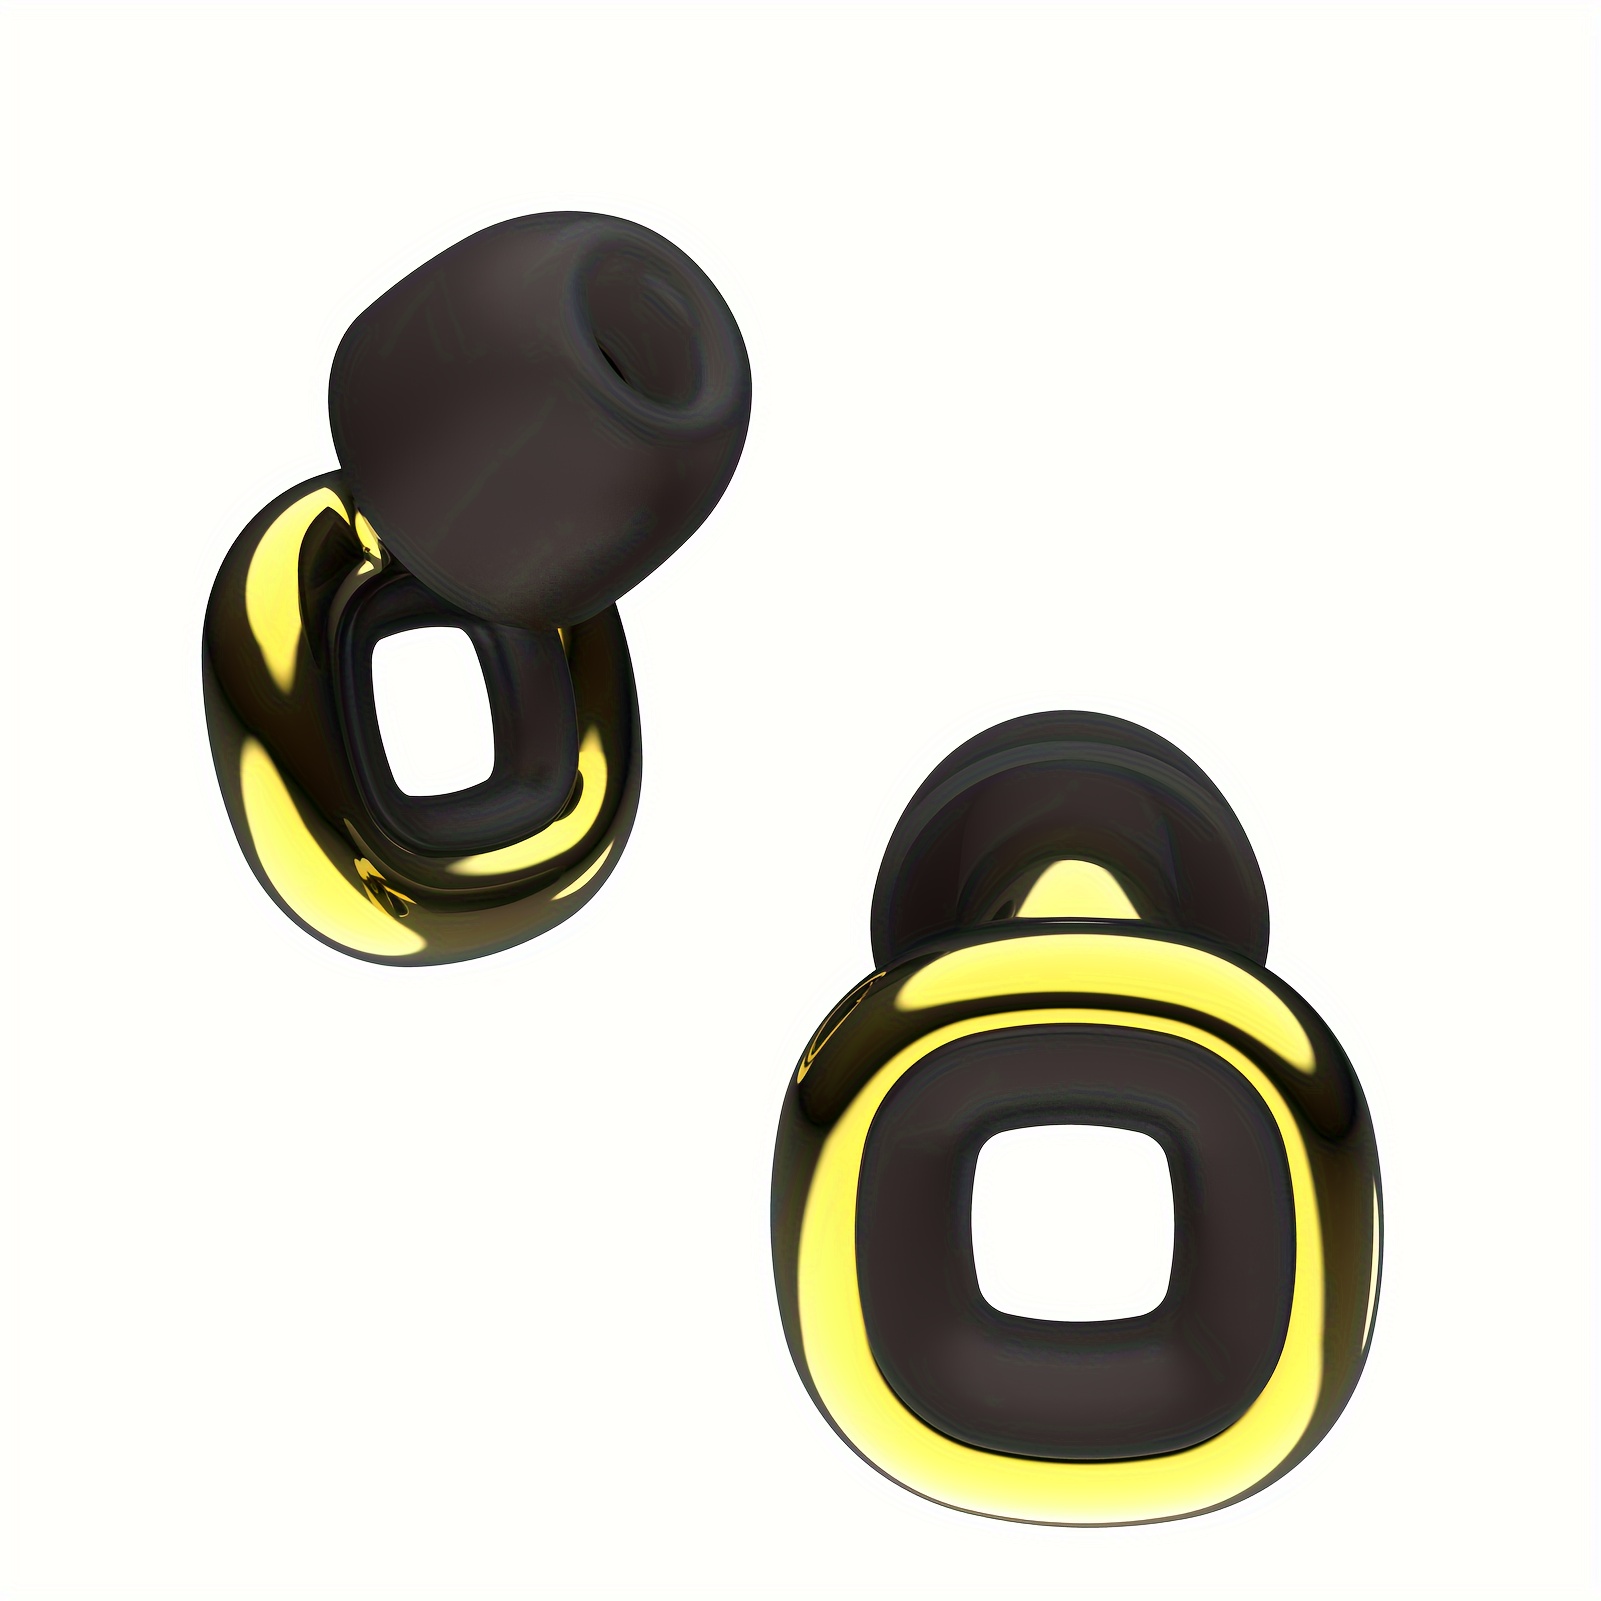 

1pair High Fidelity Earplugs For Musicians, Djs, Concerts & , Reusable Silicone Ear Plugs With 21mm/.83in Precision Filter, Comfortable & Discreet Design, With Portable Case